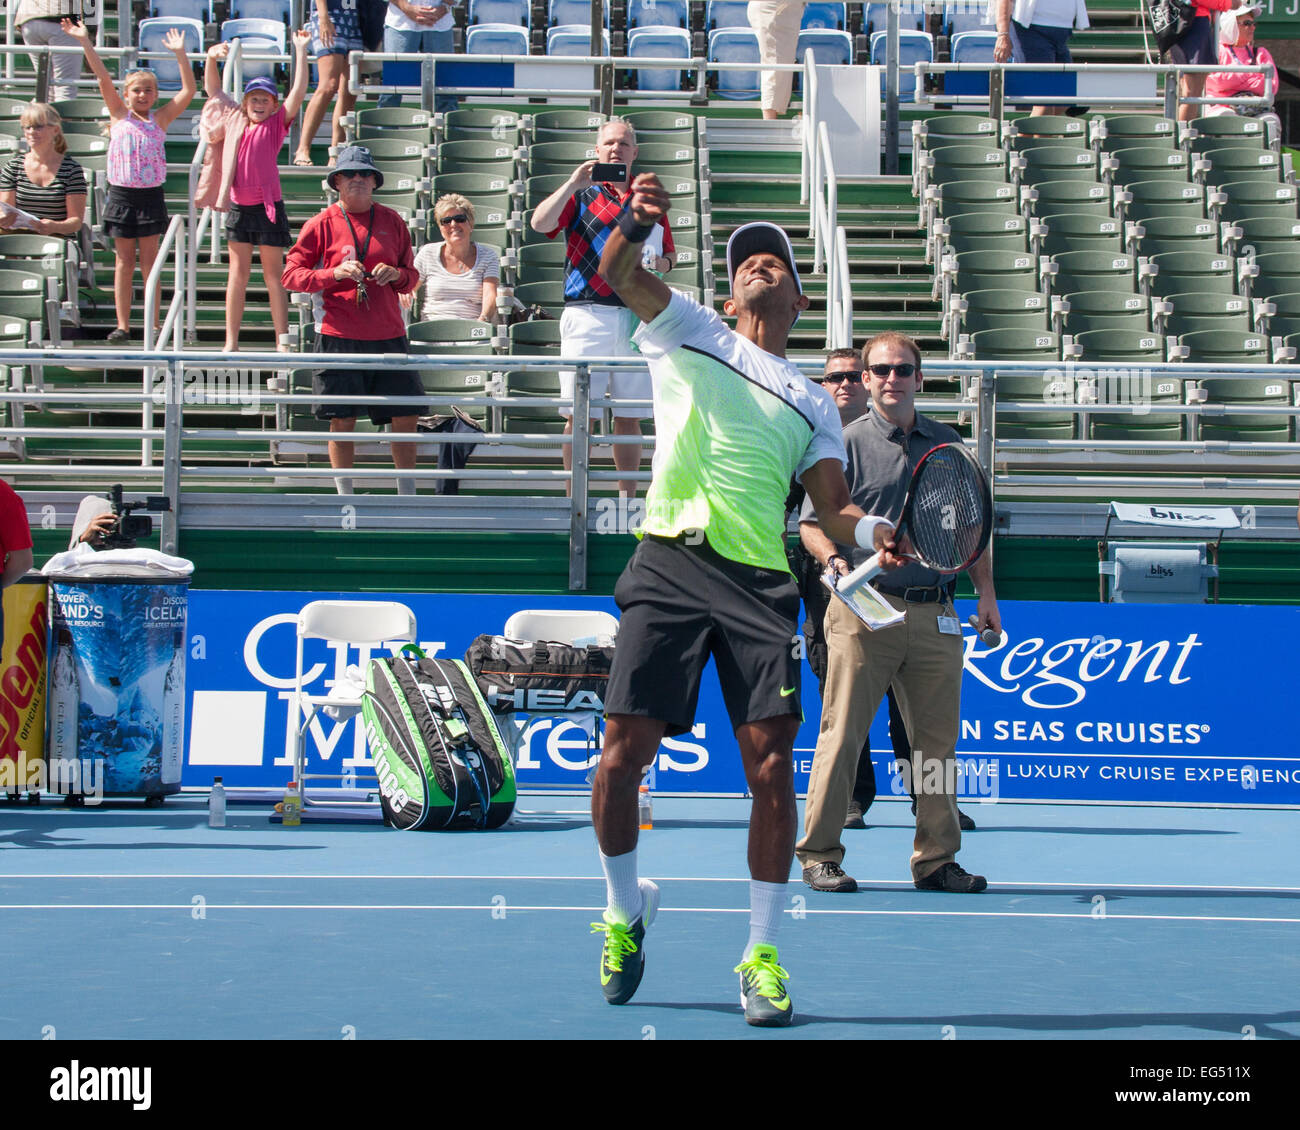 Delray Beach, Florida, US. 16th Feb, 2015. In the ATP World Tour International men's doubles round 1, RAVEN KLASSEN of South Africa throws a ball into the stands after he and LEANDER PAES (IND) defeated MALEK JAZIRI (TUN) and MARINKO MATOSEVIC (AUS) 6-3, 7-6. Credit:  Arnold Drapkin/ZUMA Wire/Alamy Live News Stock Photo